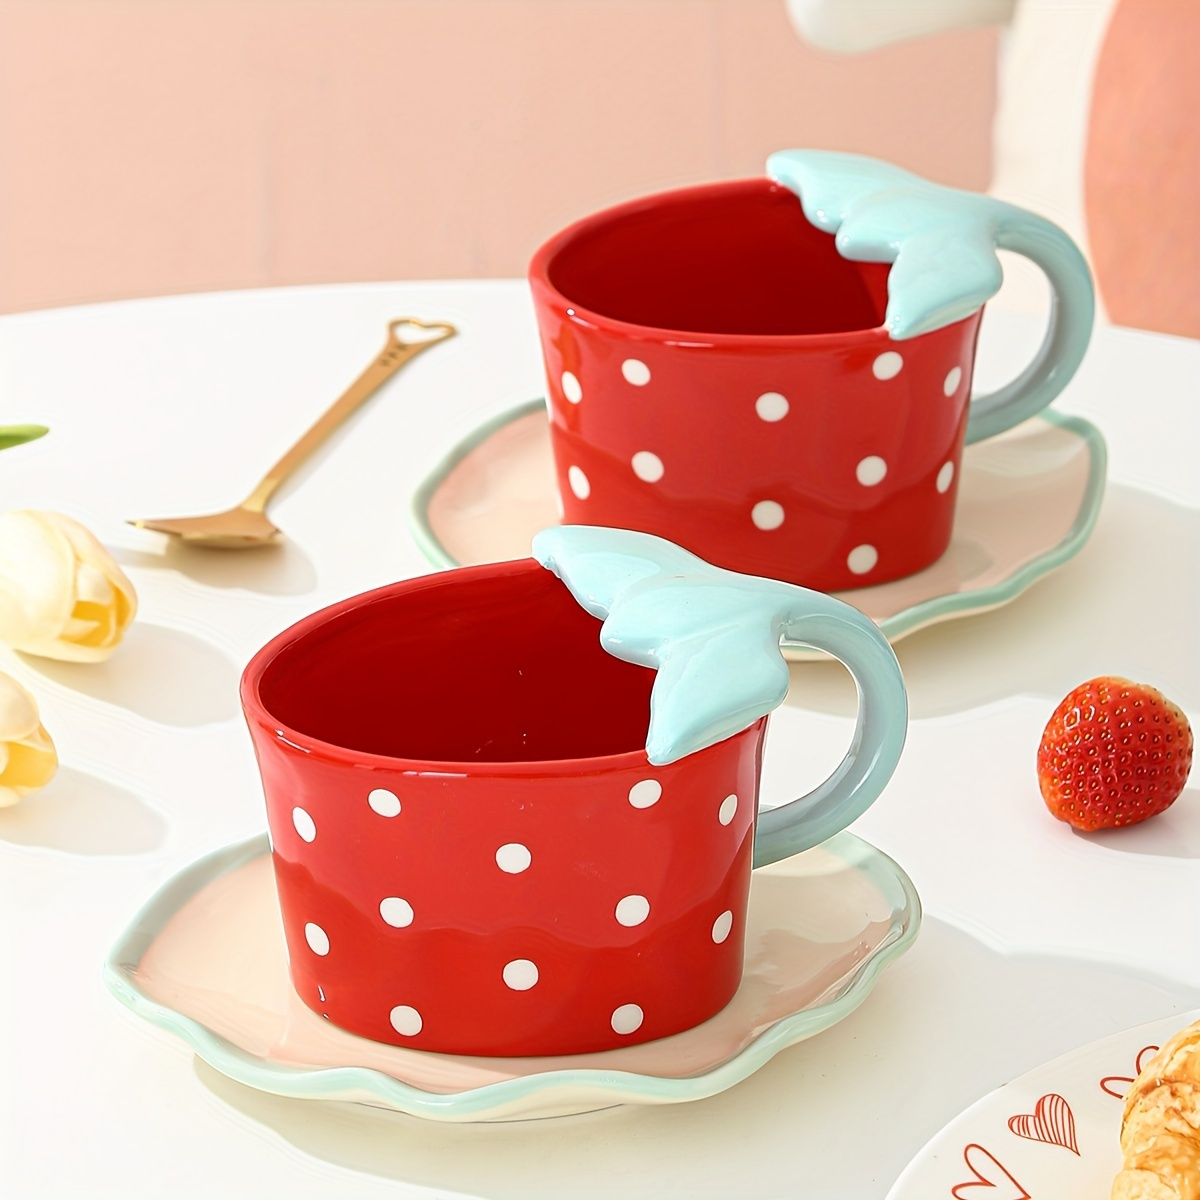 16 oz Strawberry Glass Cup – Emily Paige CO